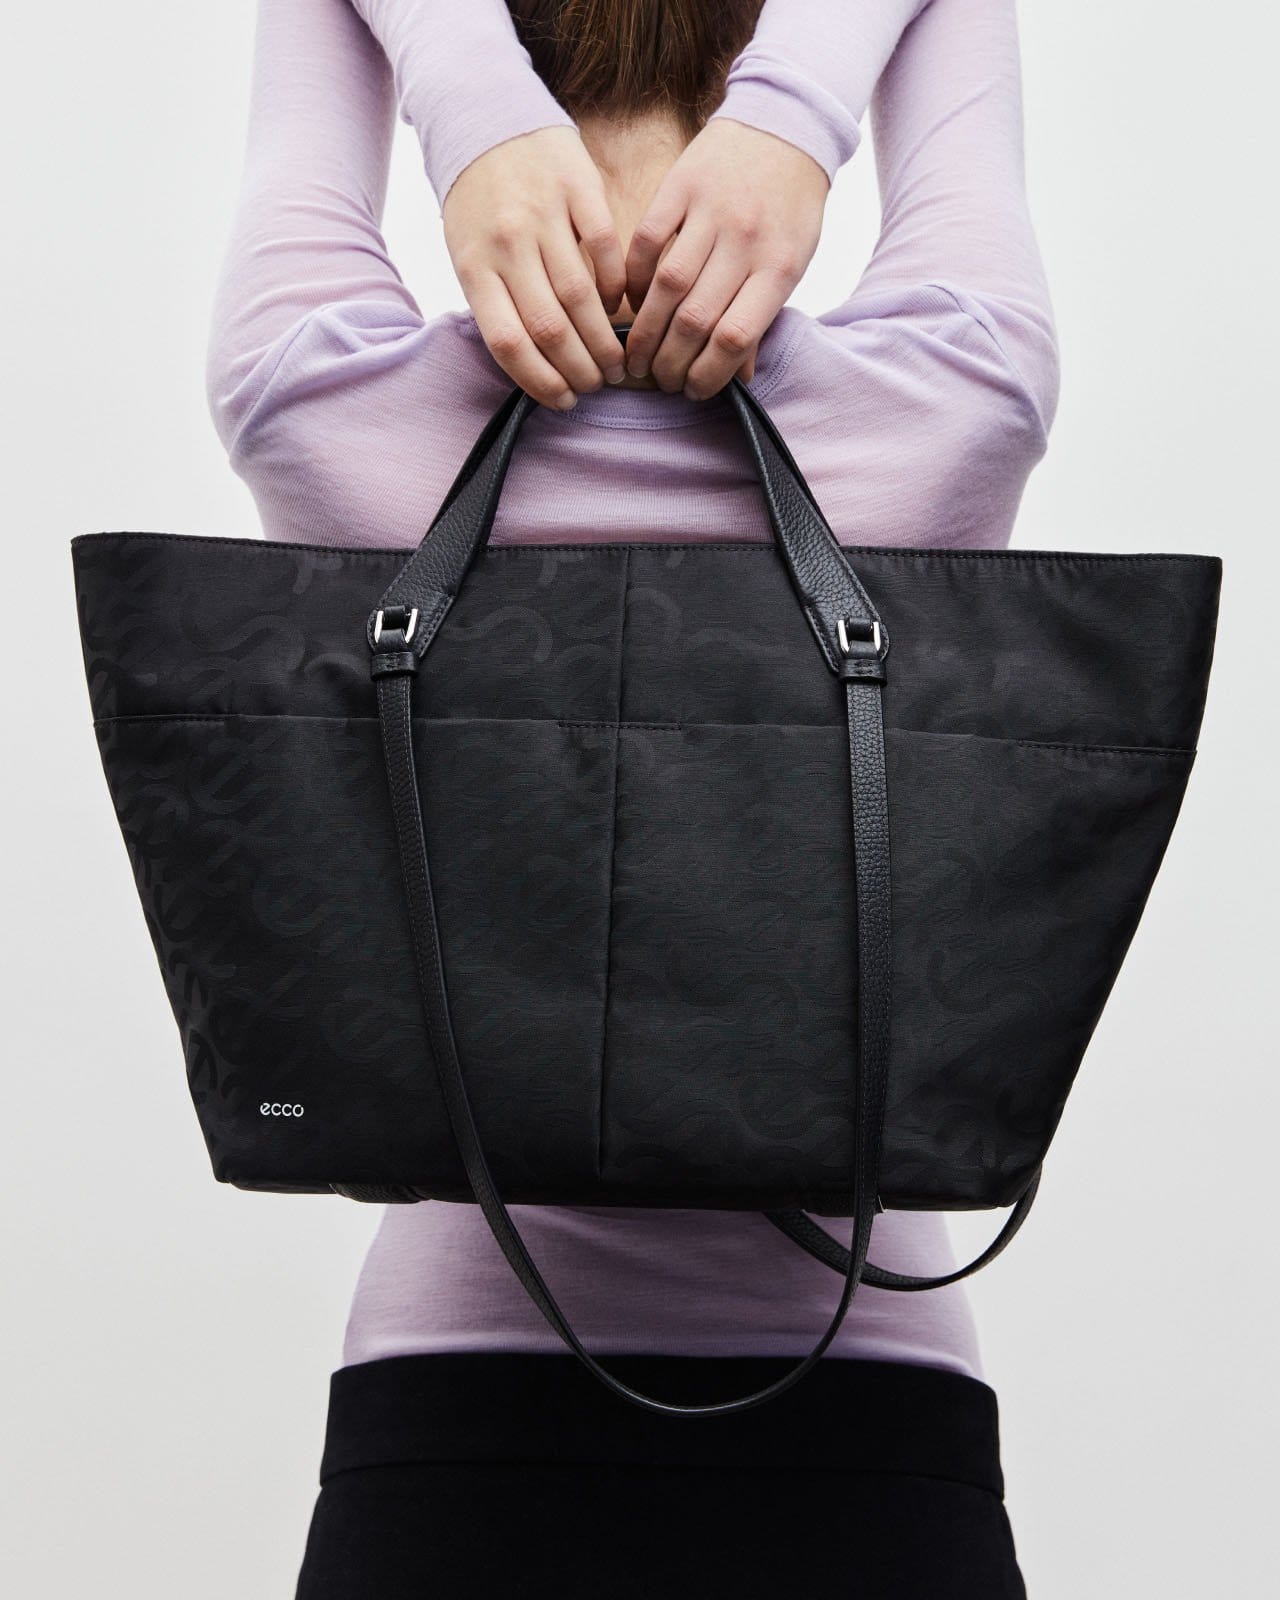 Woman holding black tote bag over her shoulders